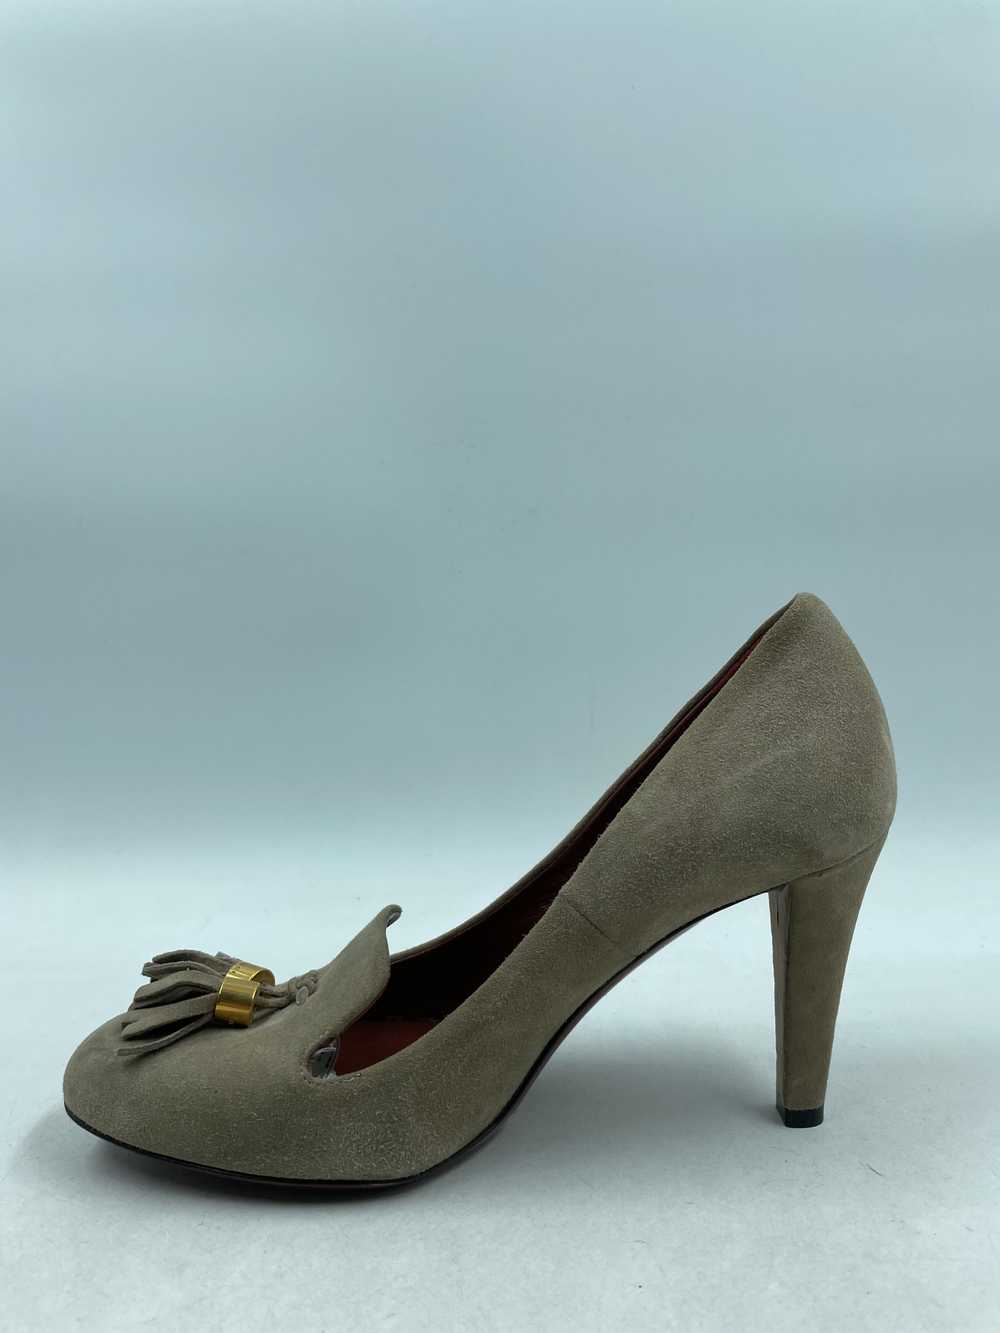 Authentic Gucci Taupe Tassel Pumps W 5.5 - image 2